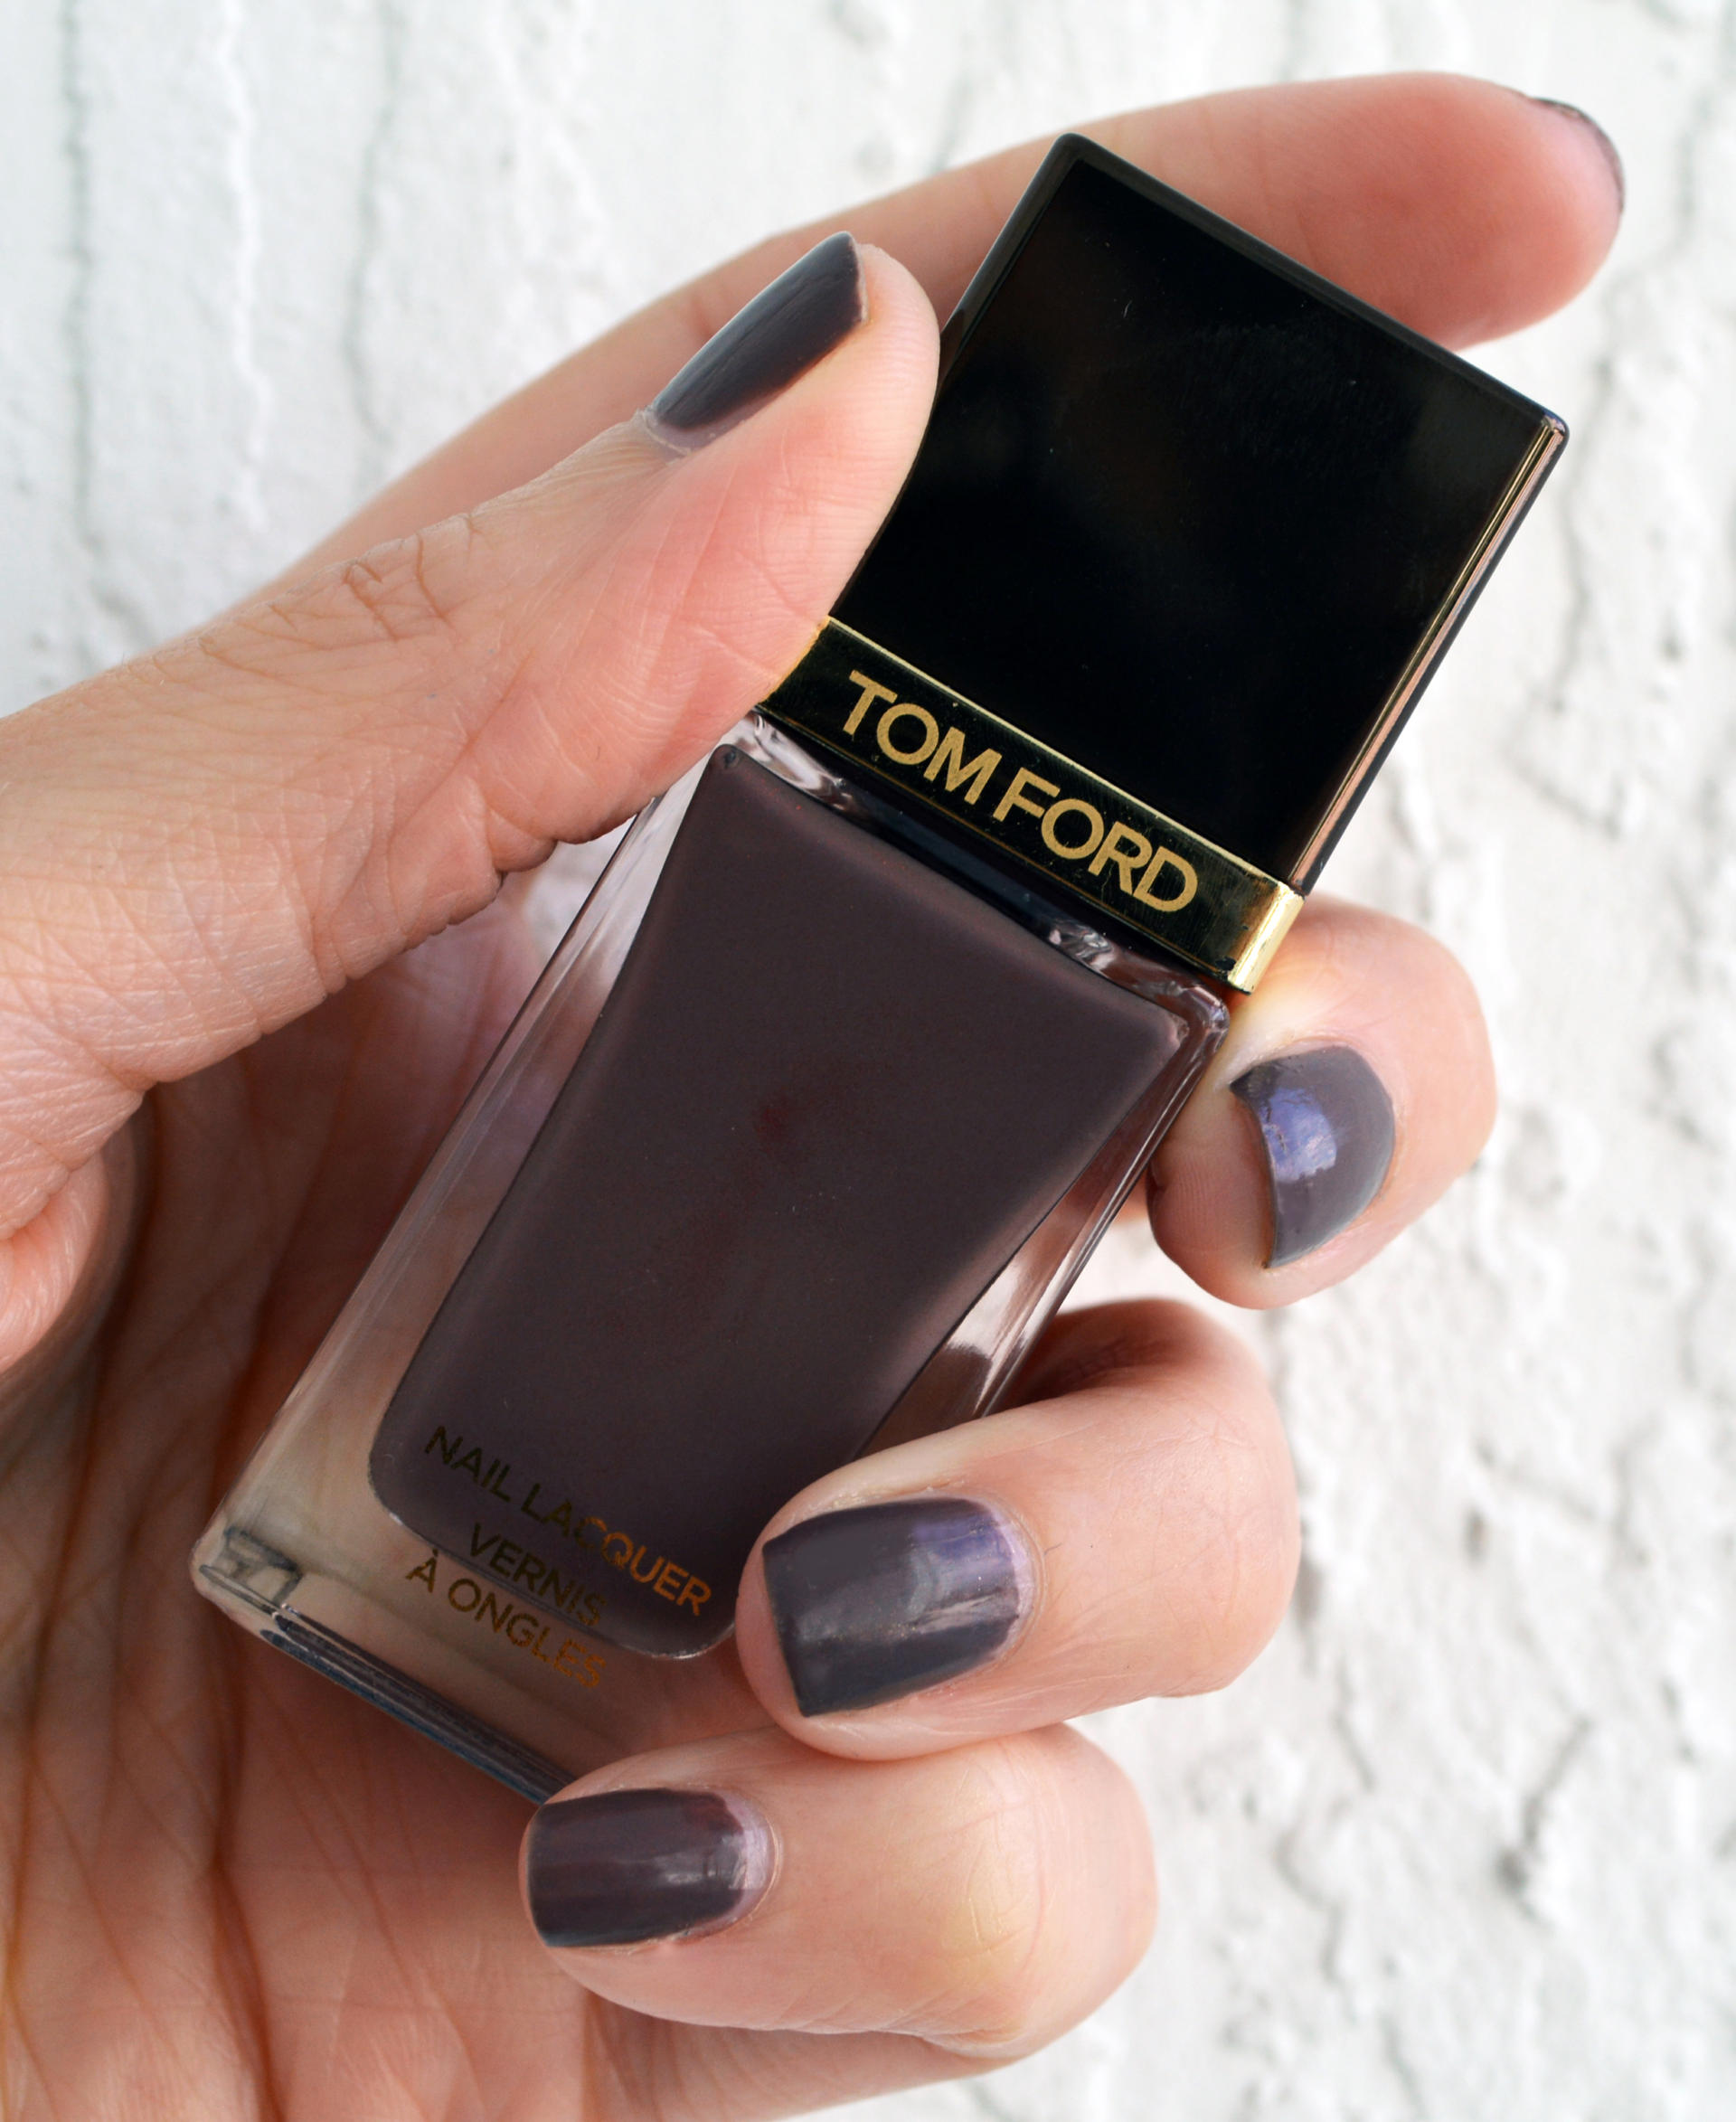  Tom Ford Nail Lacquer in Black Sugar